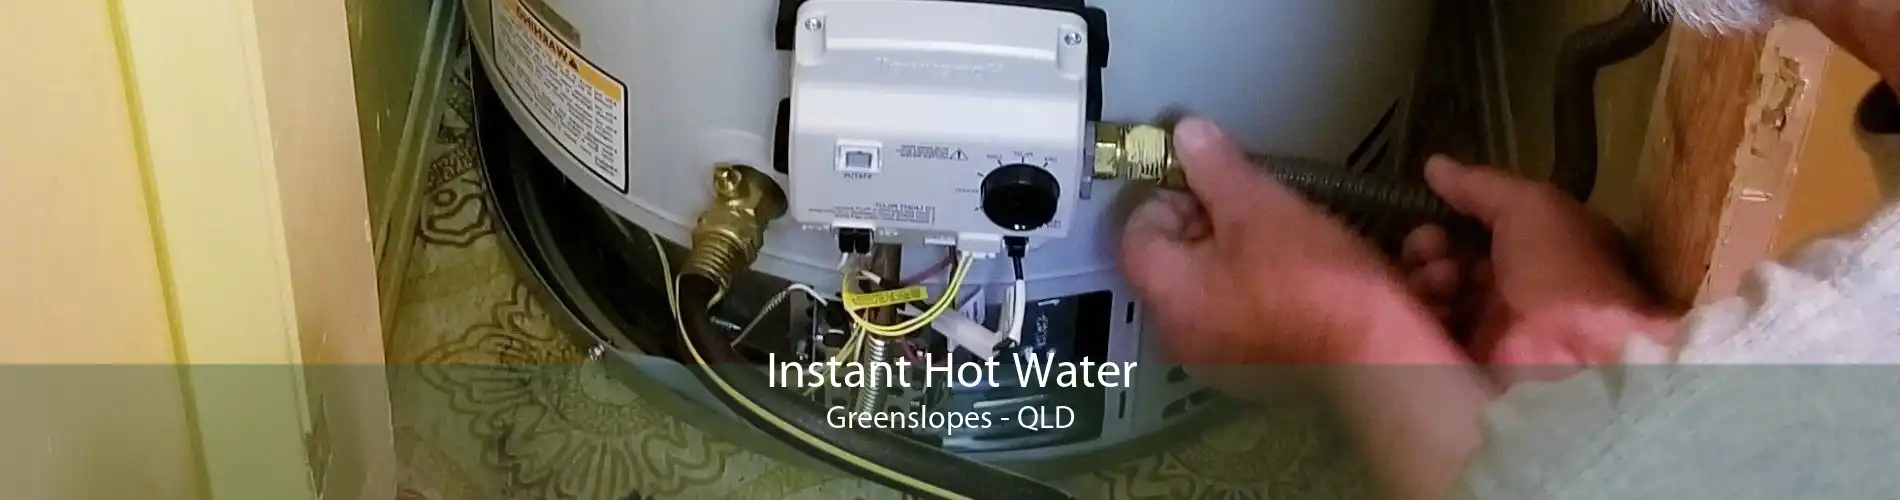 Instant Hot Water Greenslopes - QLD